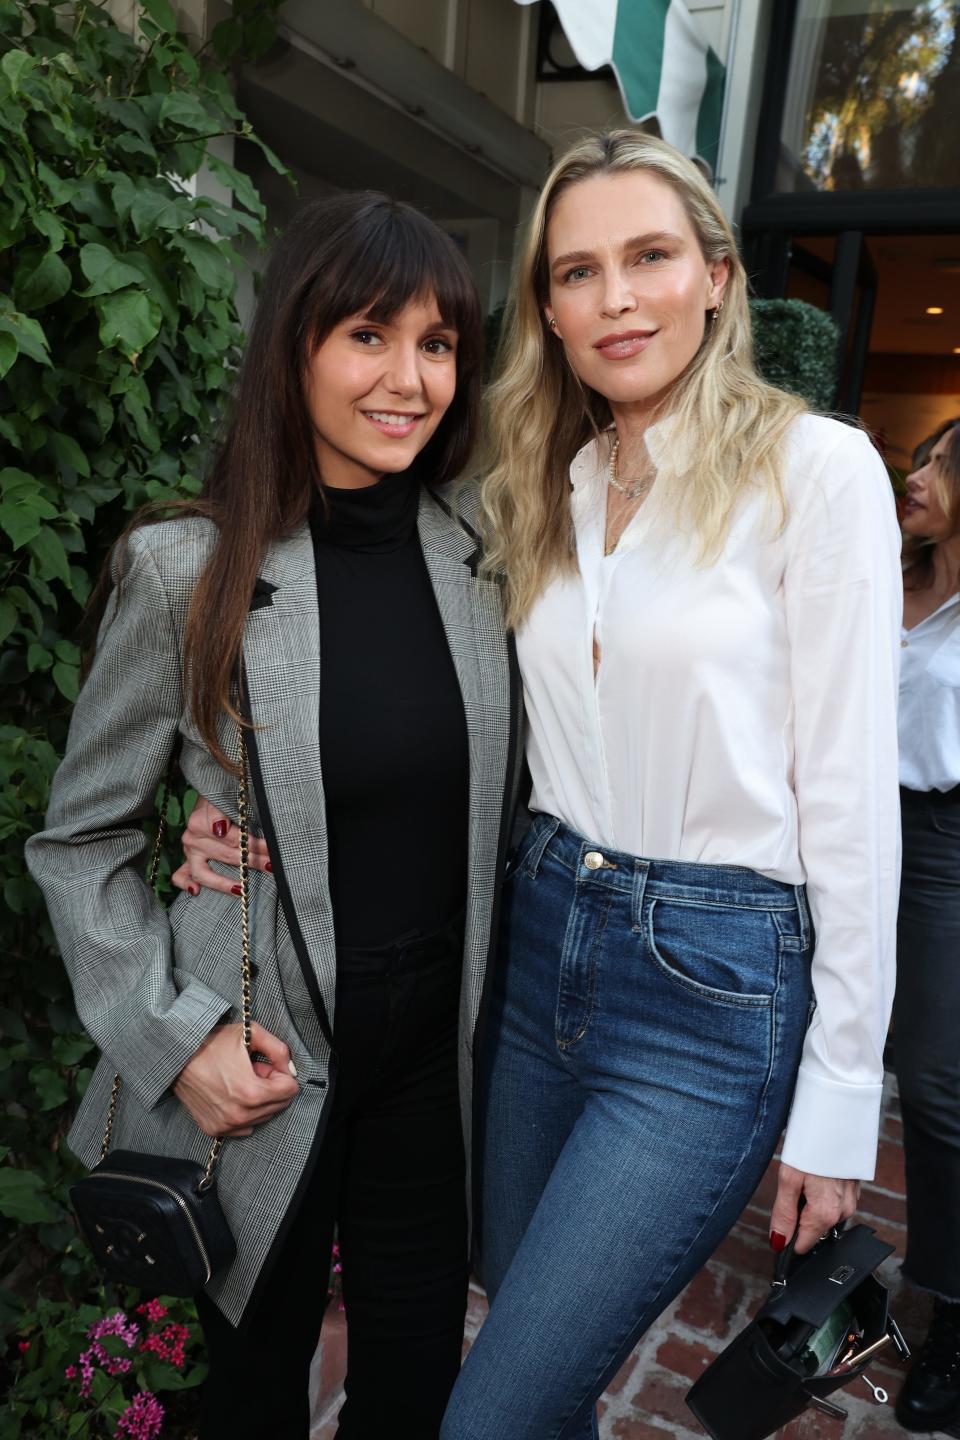 WEST HOLLYWOOD, CALIFORNIA - JUNE 27: Nina Dobrev and Sara Foster seen at the “Fly Me to the Moon” Special Screening hosted by Apple Original Films and Sony Pictures Entertainment at San Vicente Bungalows on June 27, 2024 in West Hollywood, California. “Fly Me to the Moon” opens in theaters on Friday, July 12, 2024. (Photo by Eric Charbonneau/Getty Images for Apple TV+)